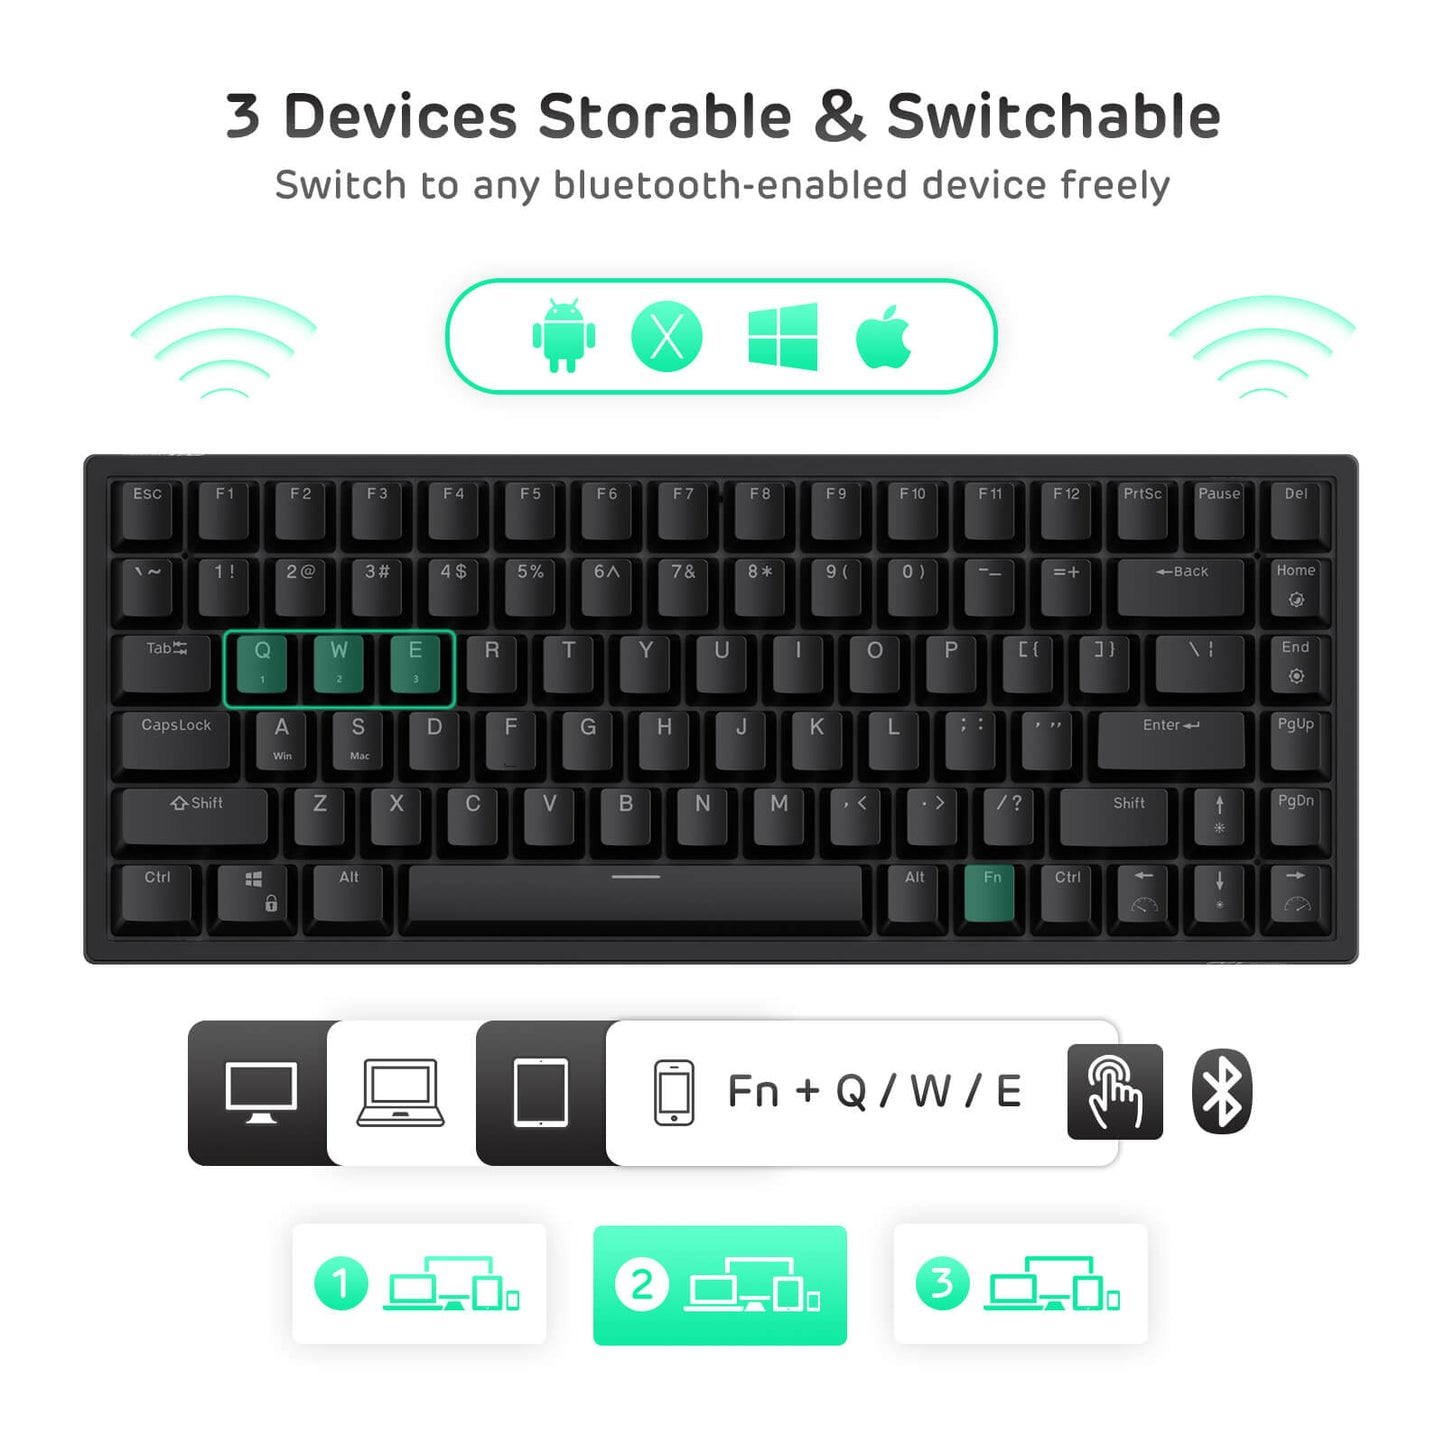 Royal Kludge RK RK84 RGB 84 Keys Mechanical Gaming Keyboard 2.4G Wireless Bluetooth Hot-Swappable with Bluetooth 5.0